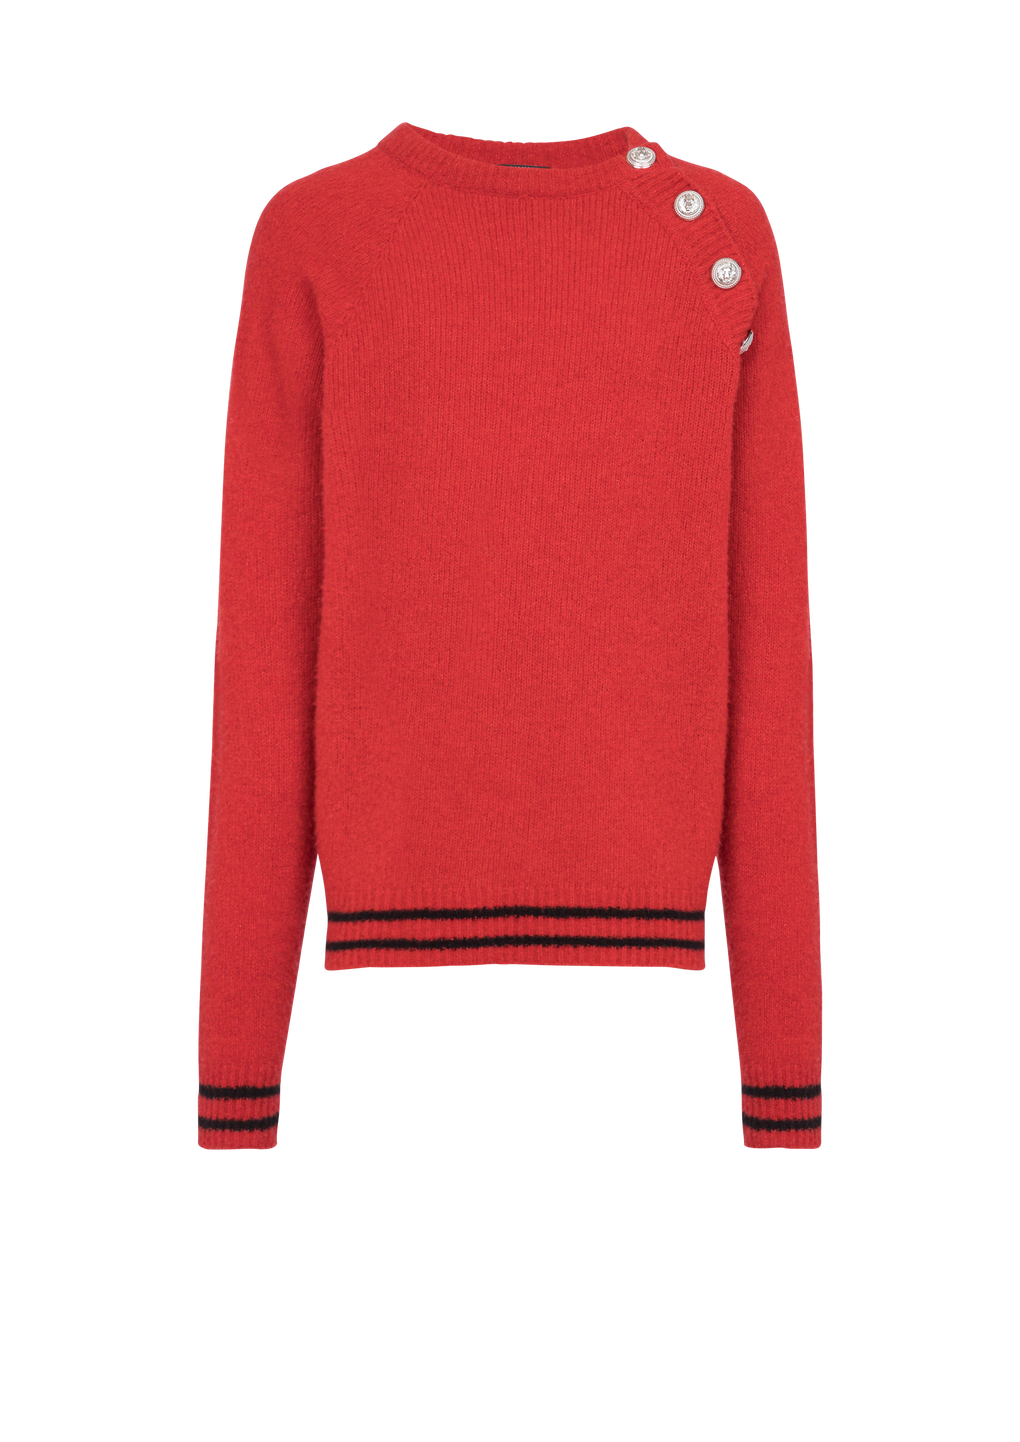 Cashmere sweater, red, hi-res